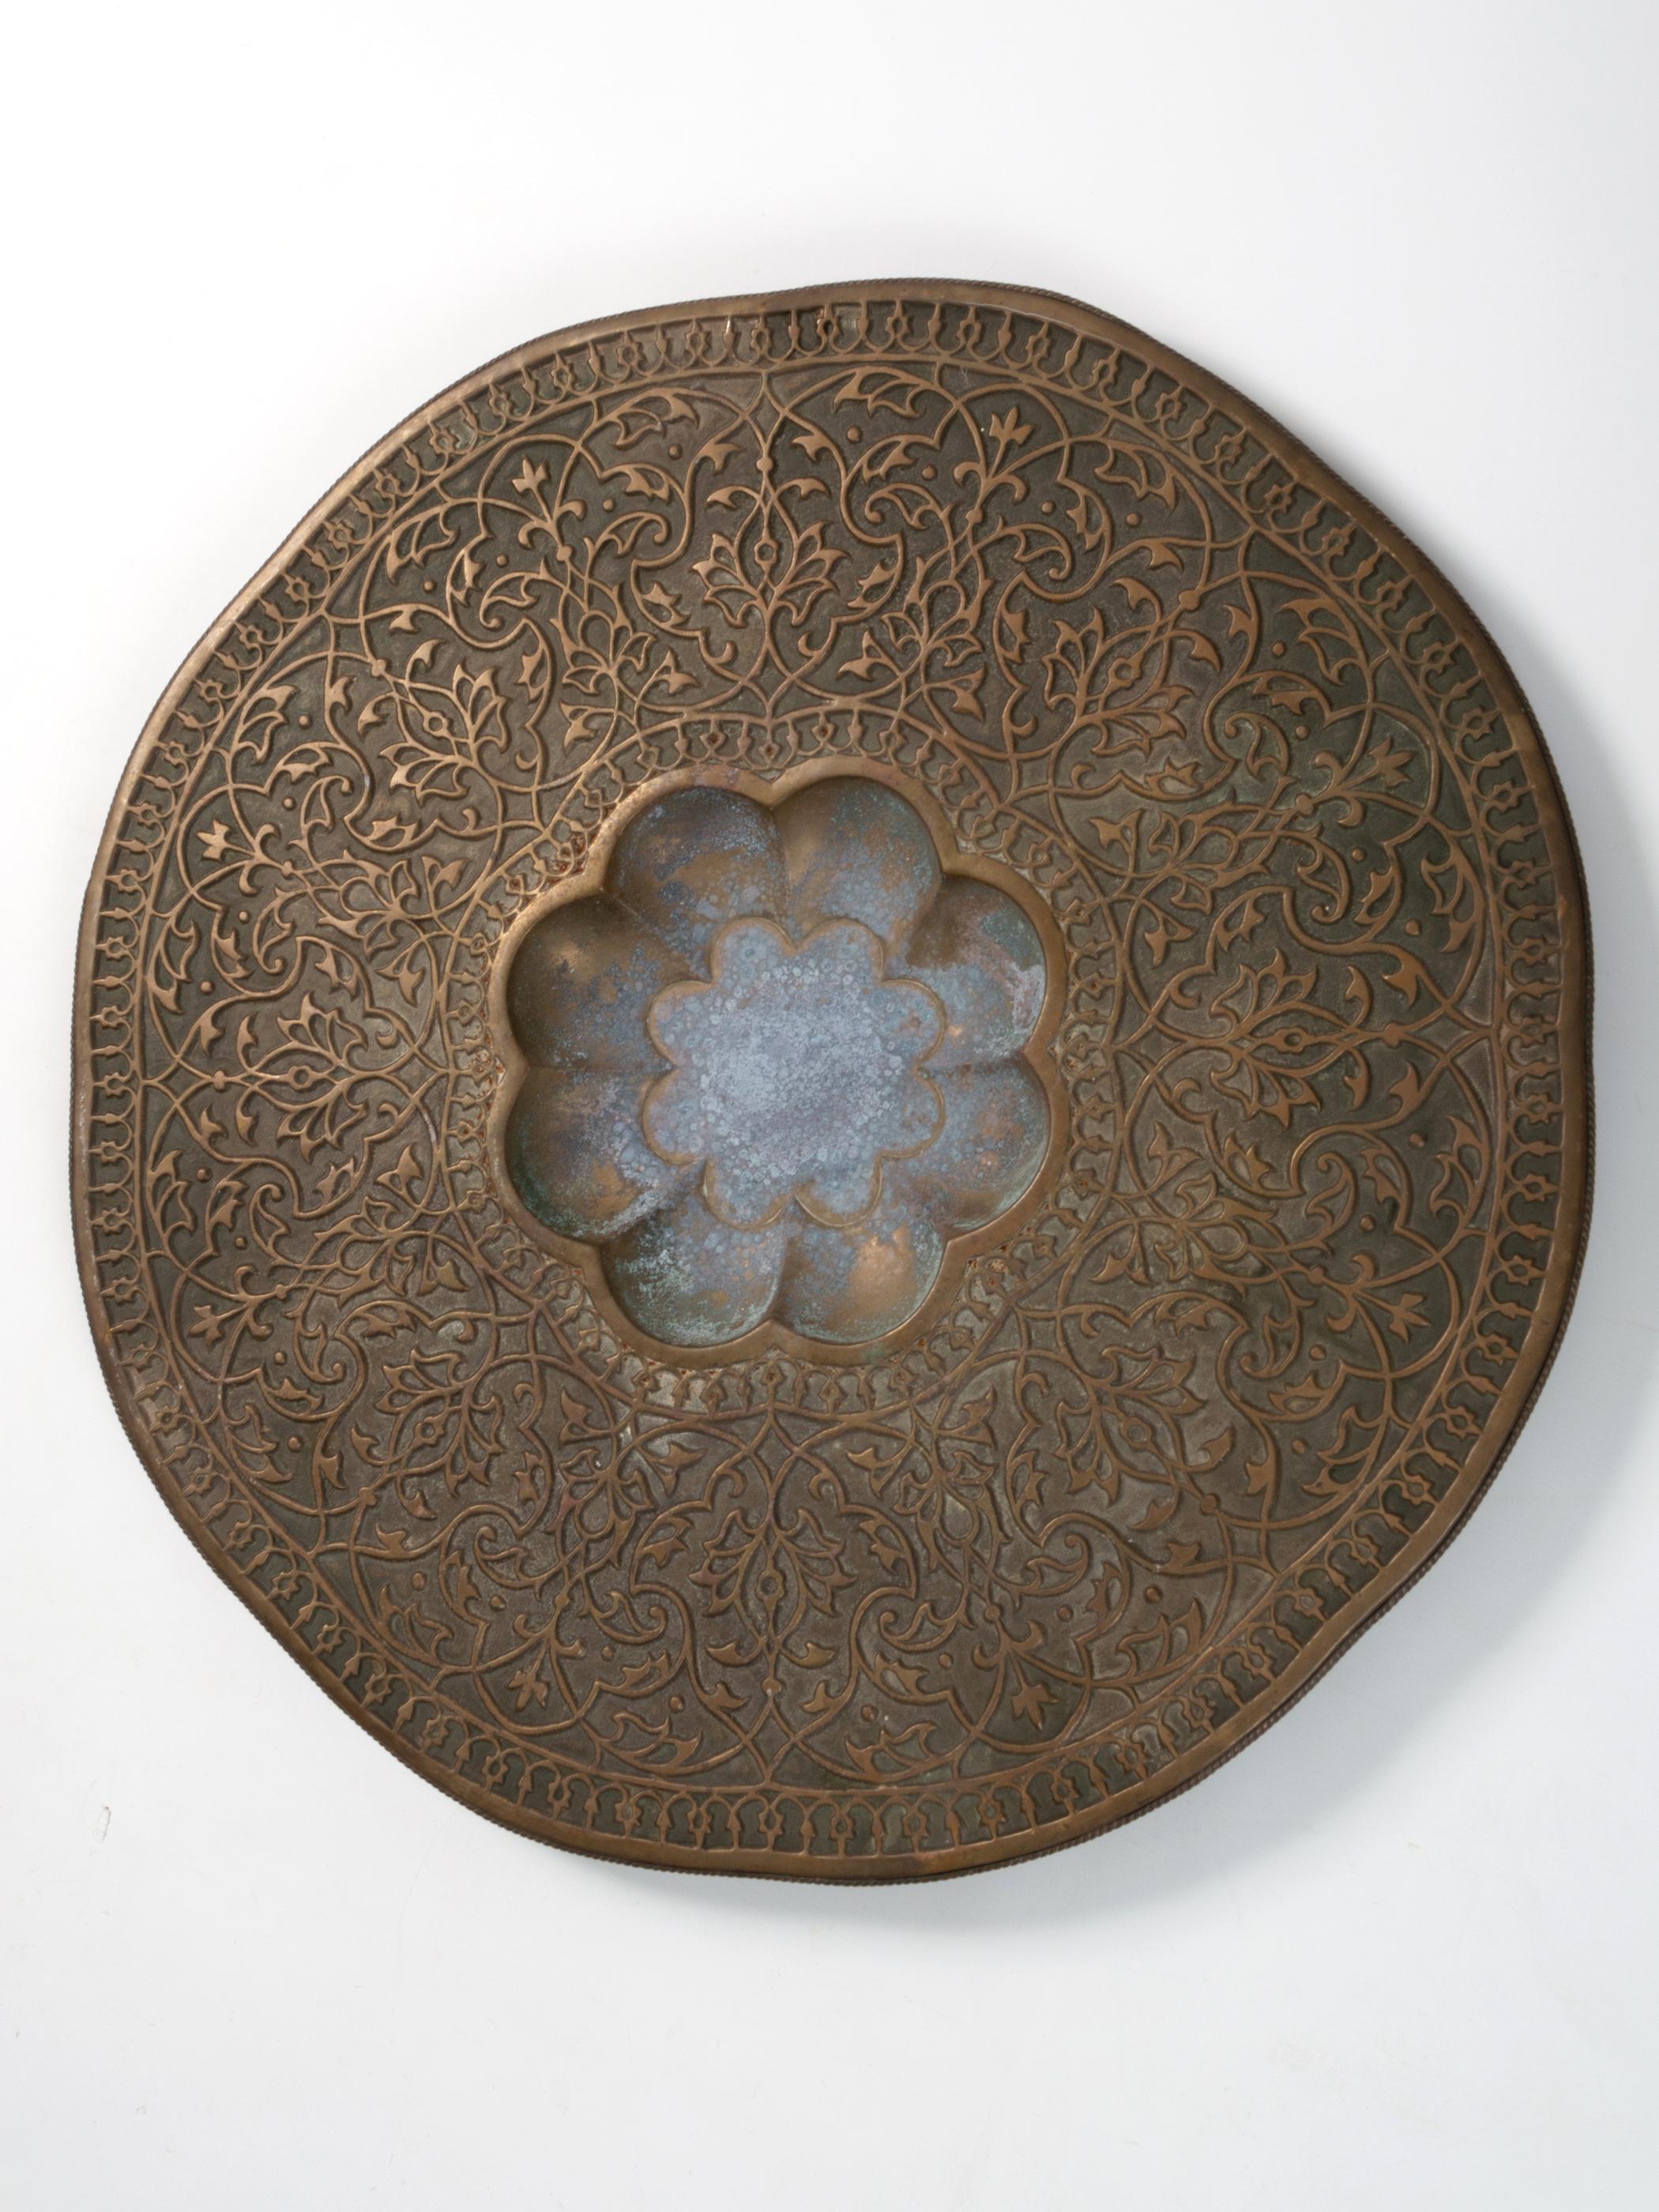 A Large 19th Century Turkish Brass Copper Wall Charger C.1850.
Beautifully hand engraved stylised floral motifs with attractive patination to the coppered brass.

Could be used as an ornate serving platter

In good condition with expected signs of